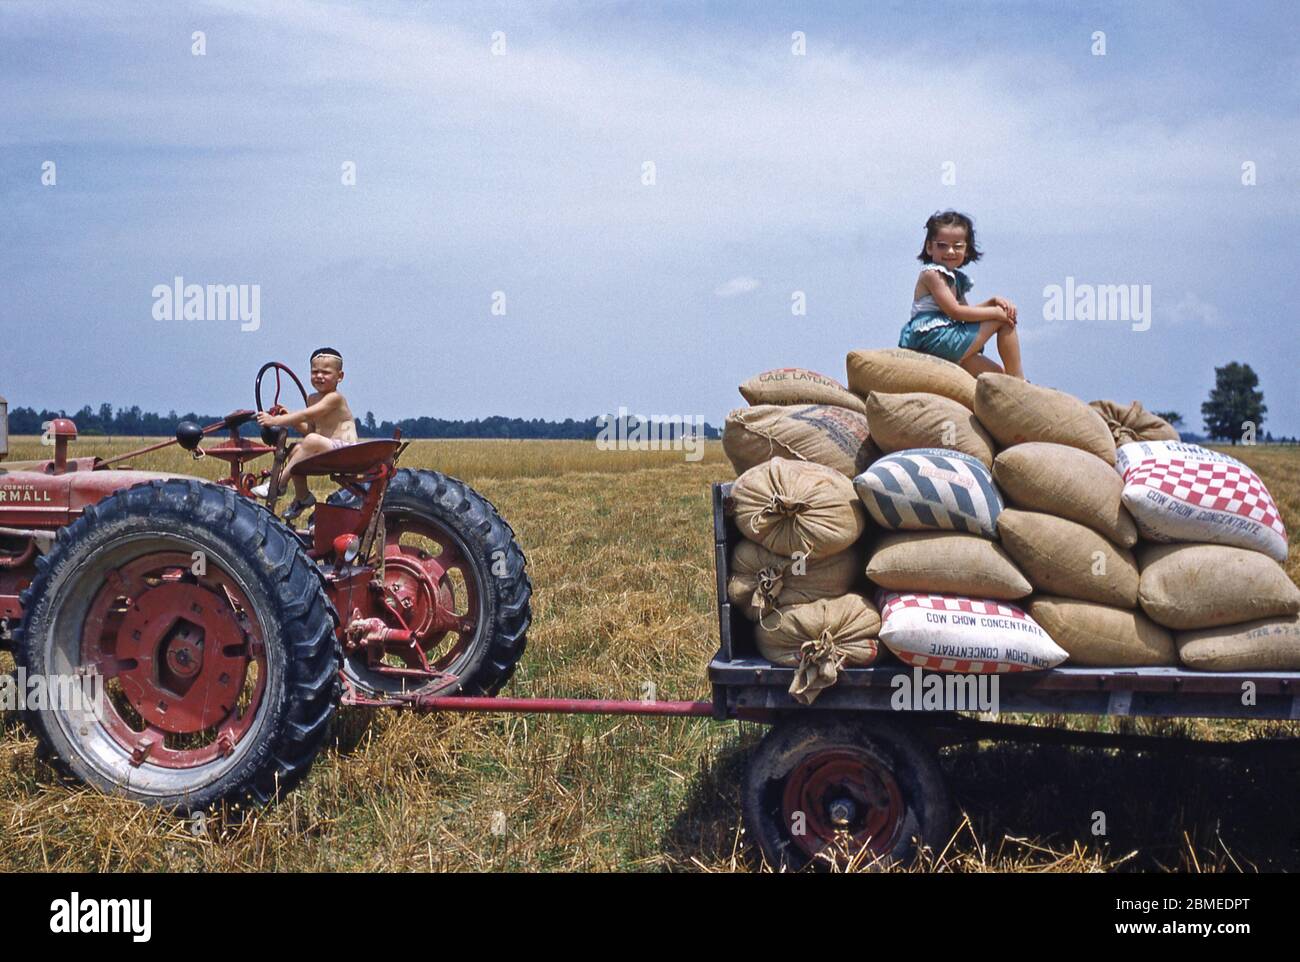 Two children playing in the sunshine on a tractor and trailer on the family farm, USA in the early 1950s. The red and blue sacks on the trailer contain 'Chow Chow Concentrate', an animal feed supplement. Stock Photo